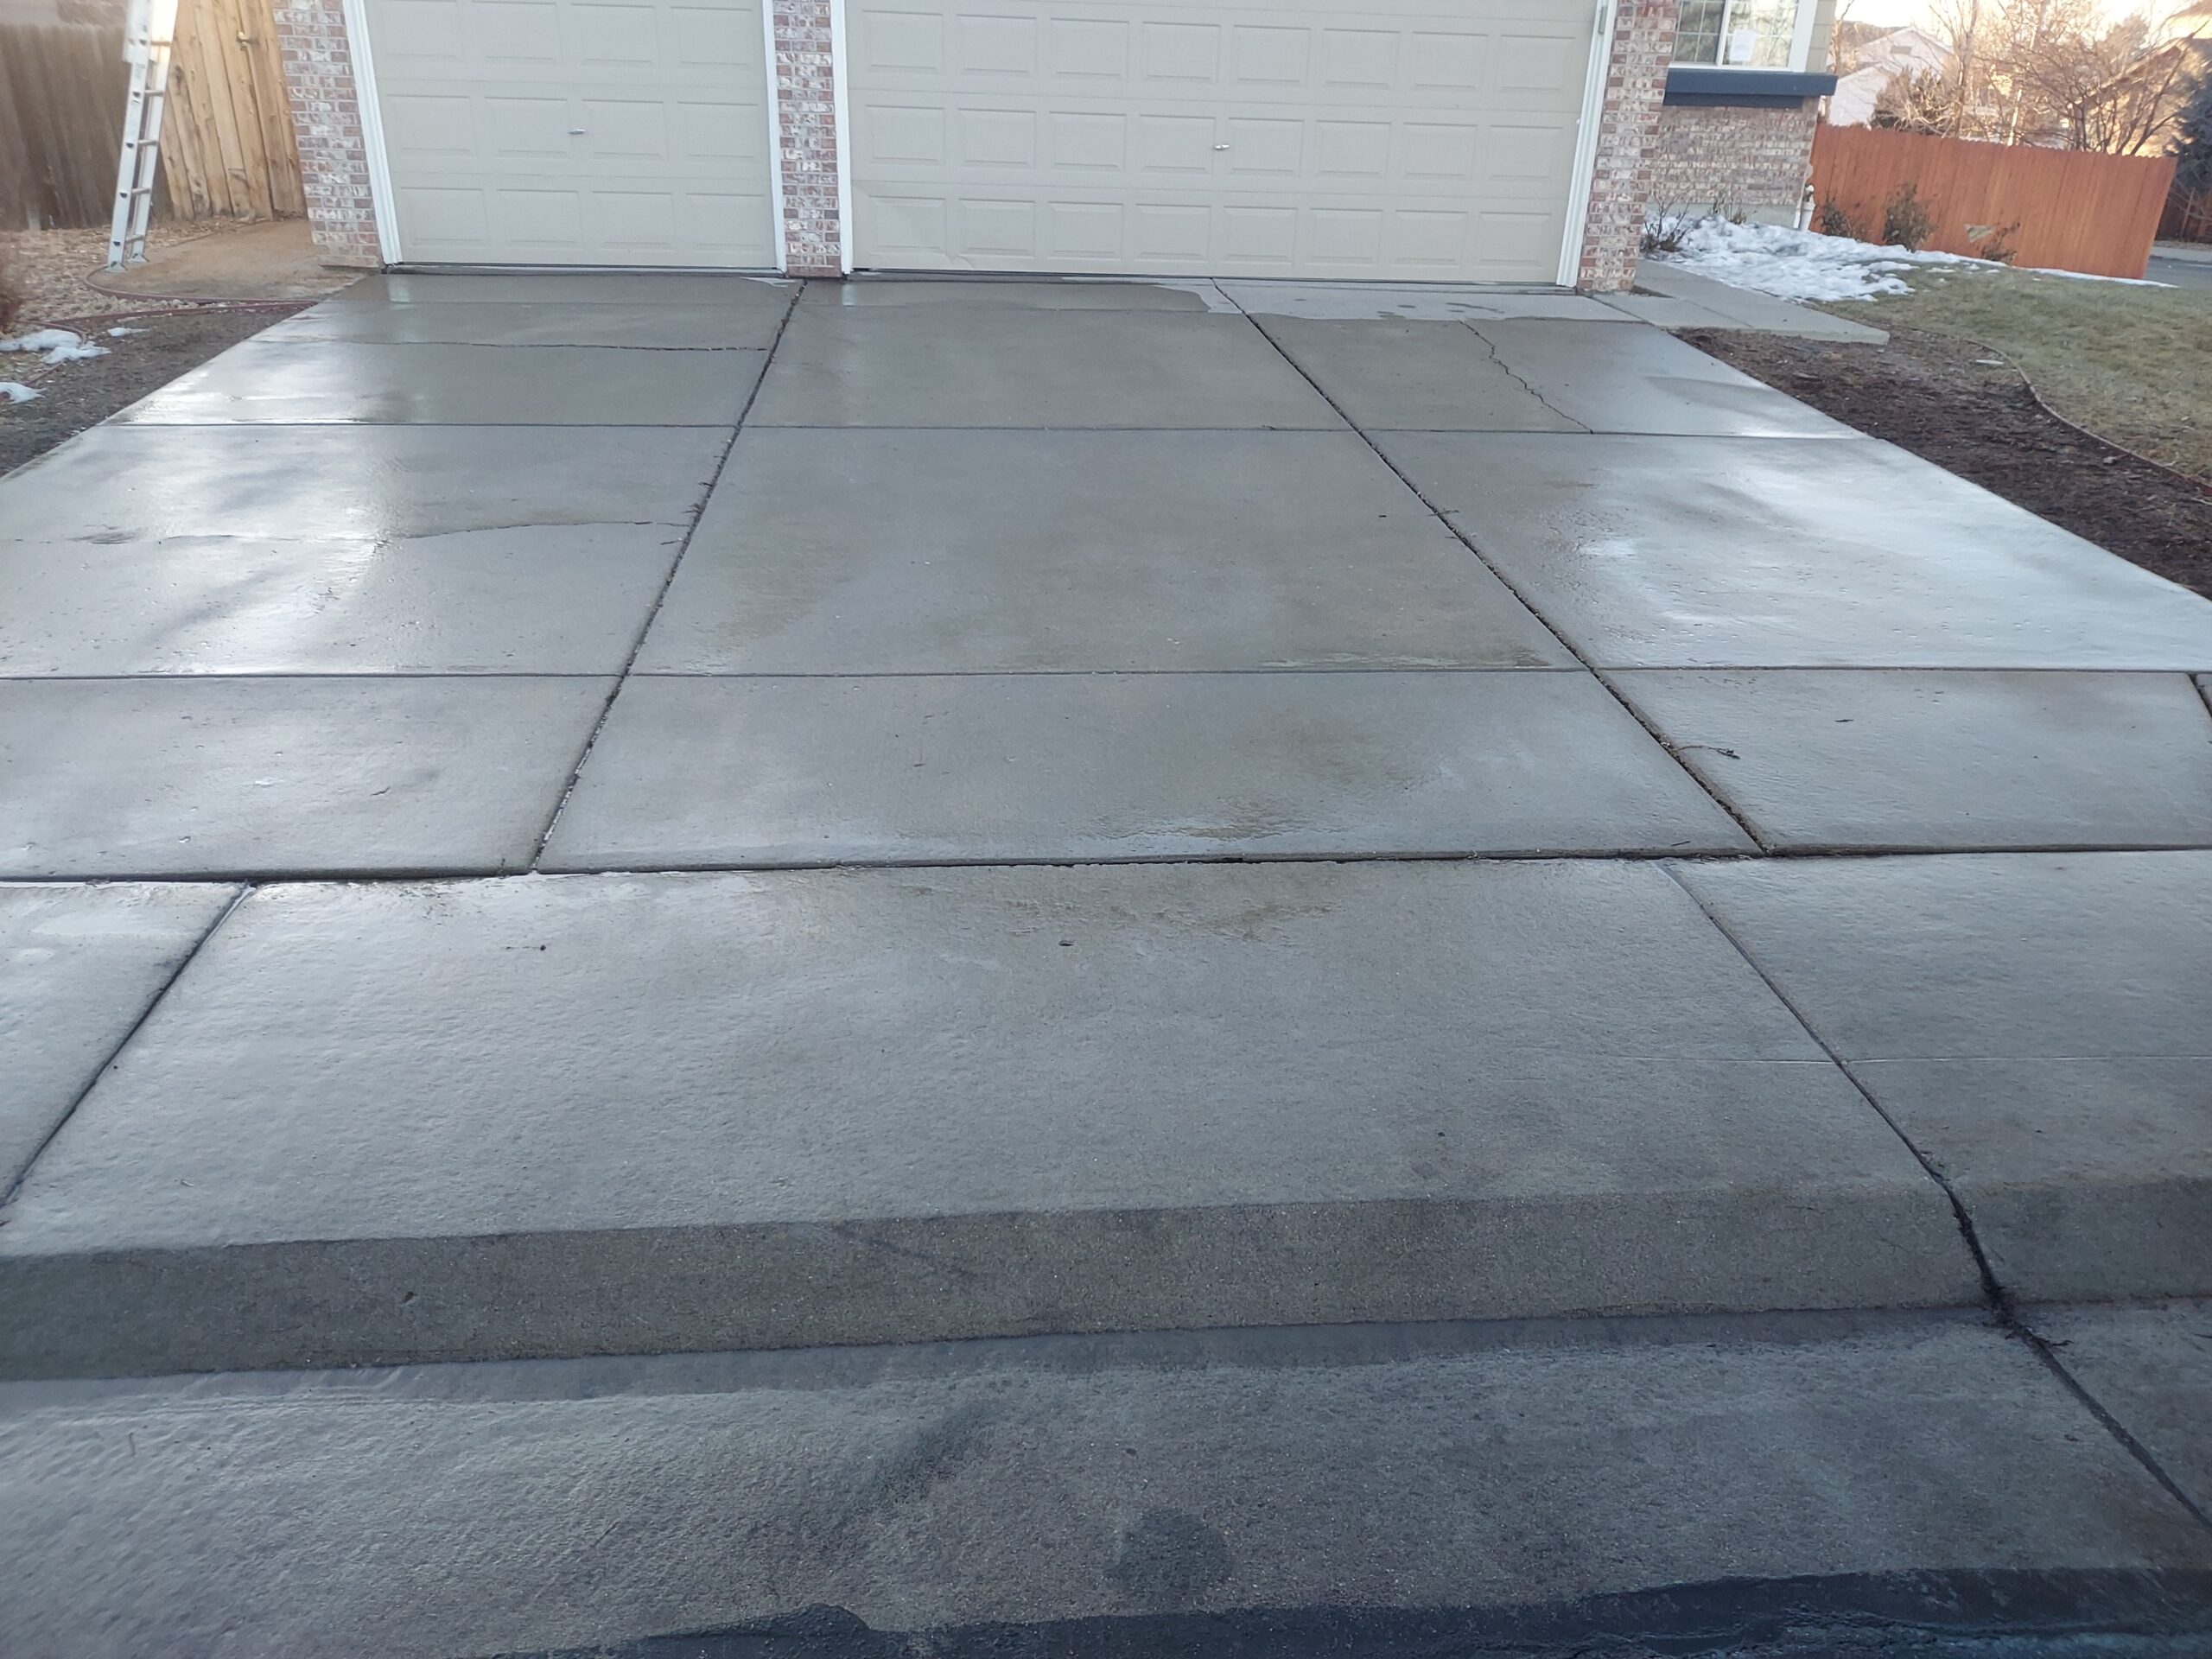 Driveway cleaned up.